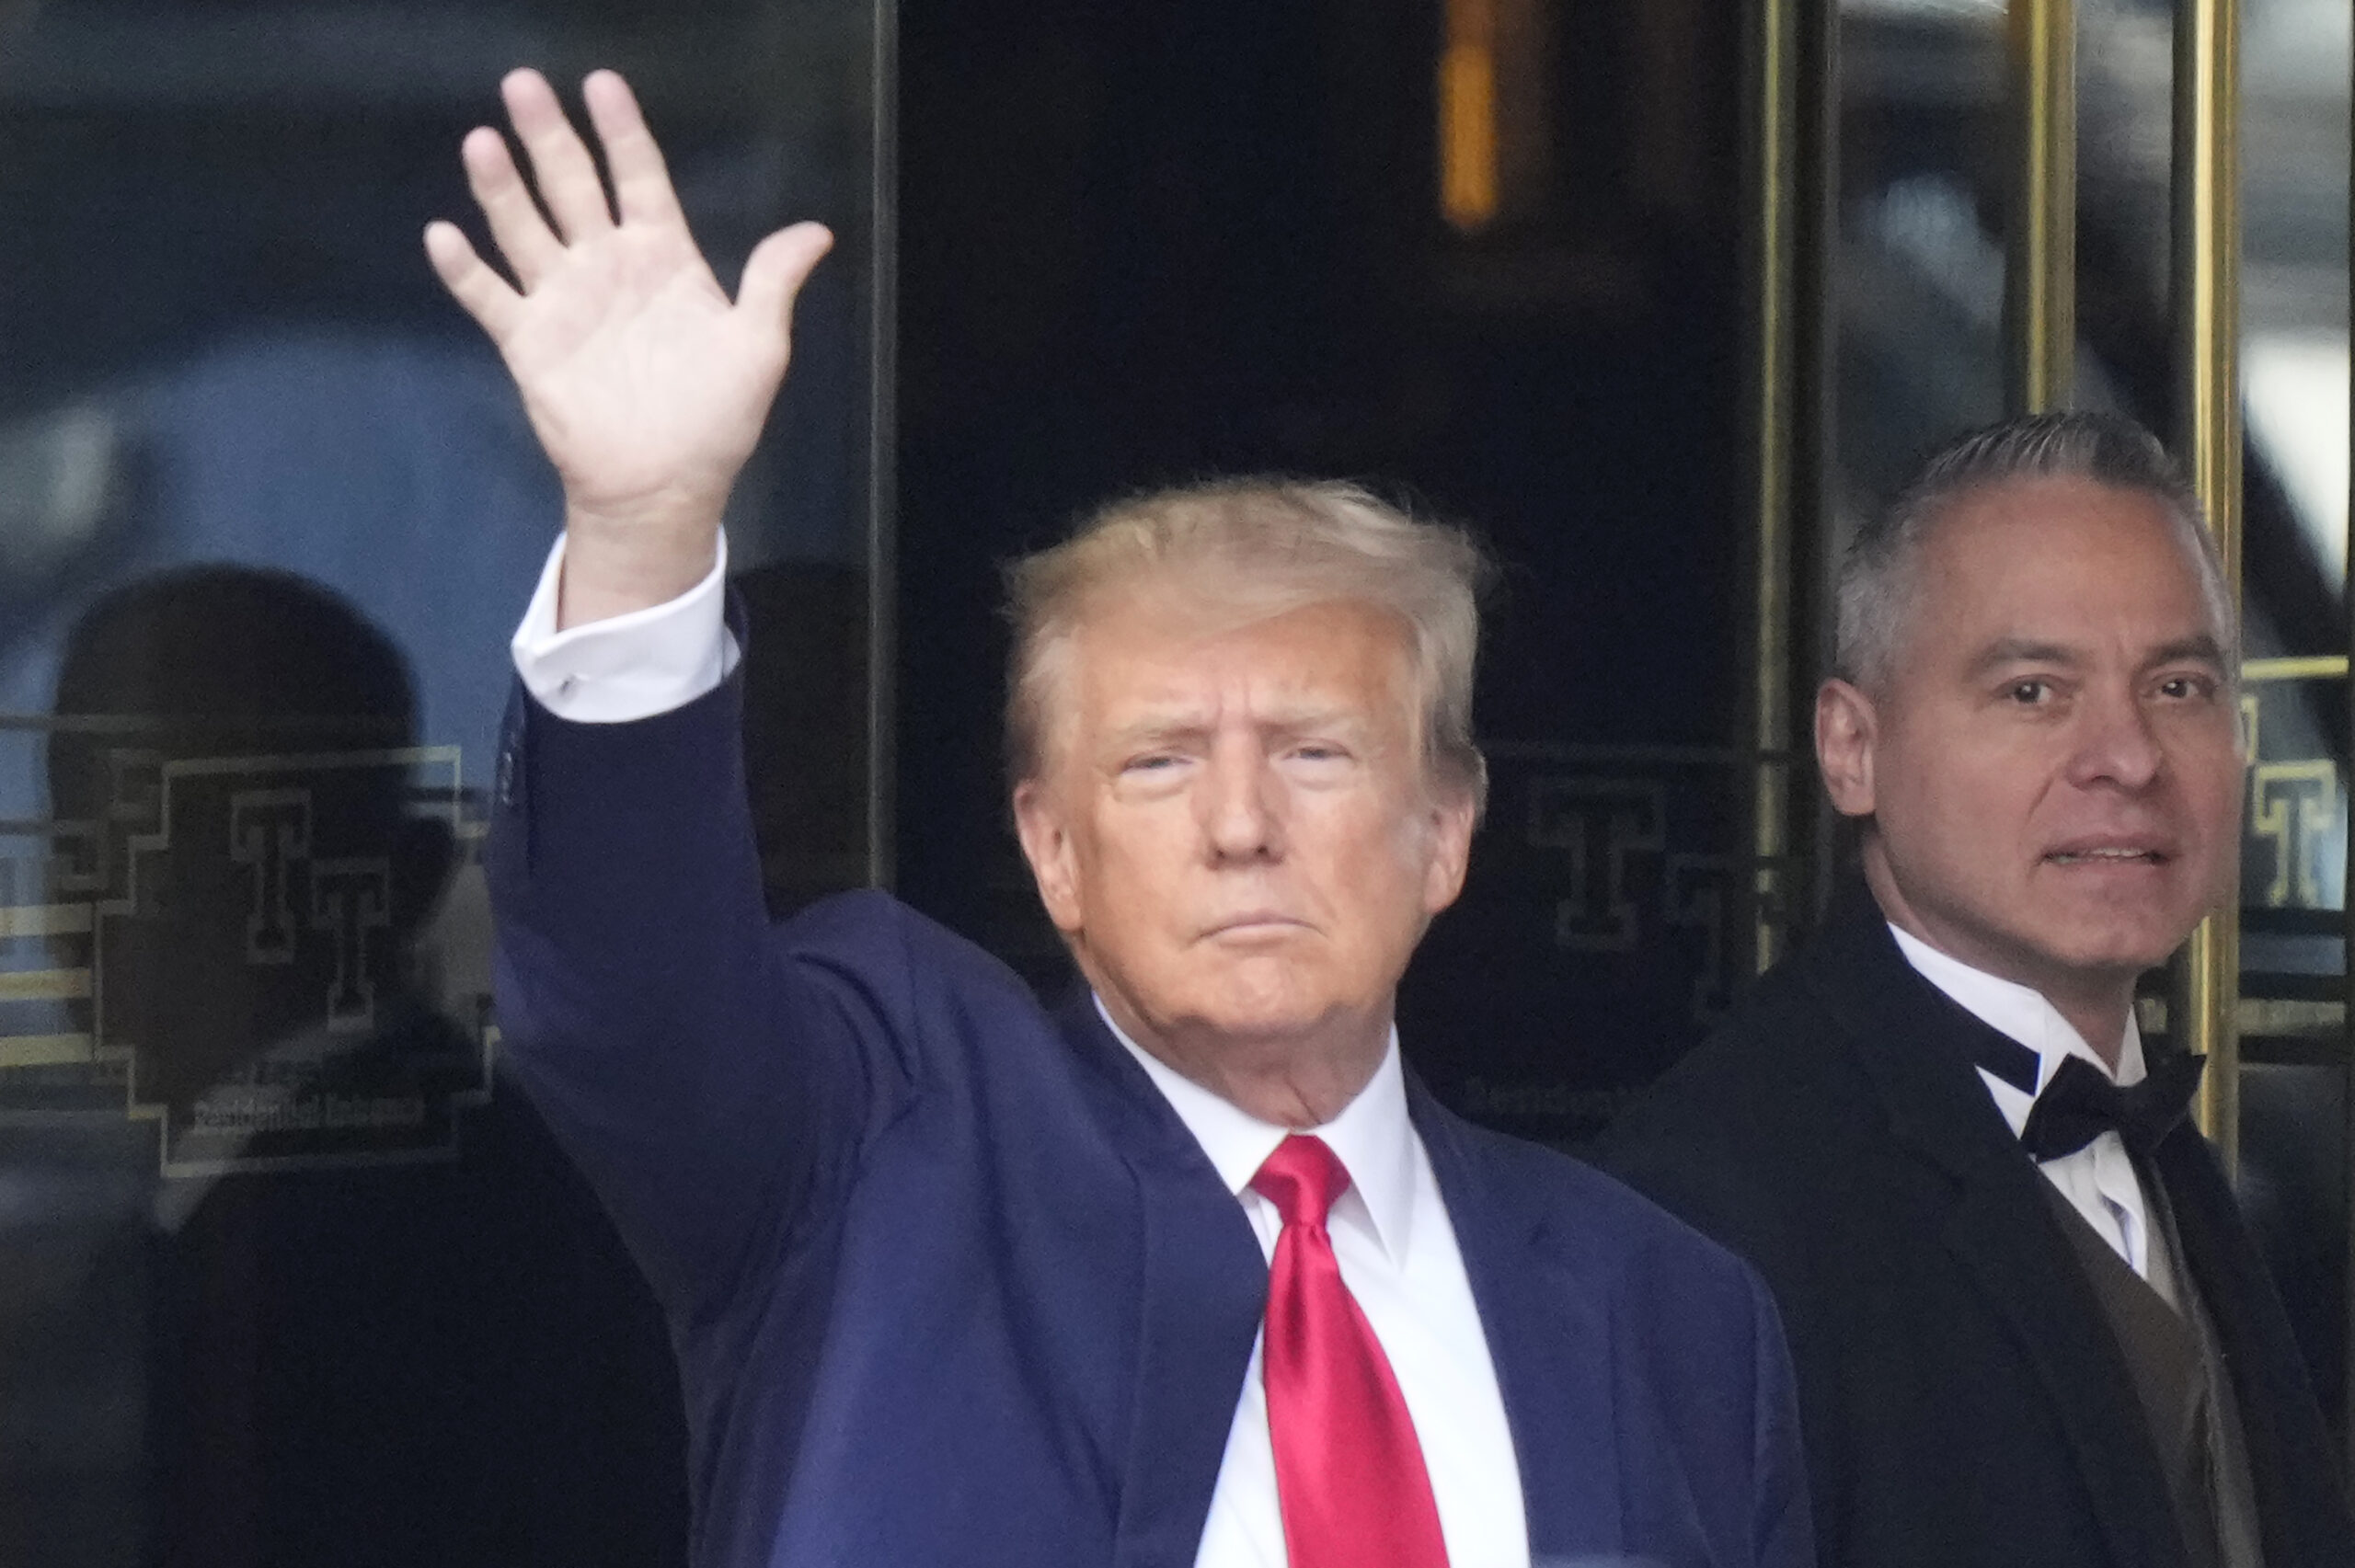 Former President Donald Trump leaves Trump Tower in New York